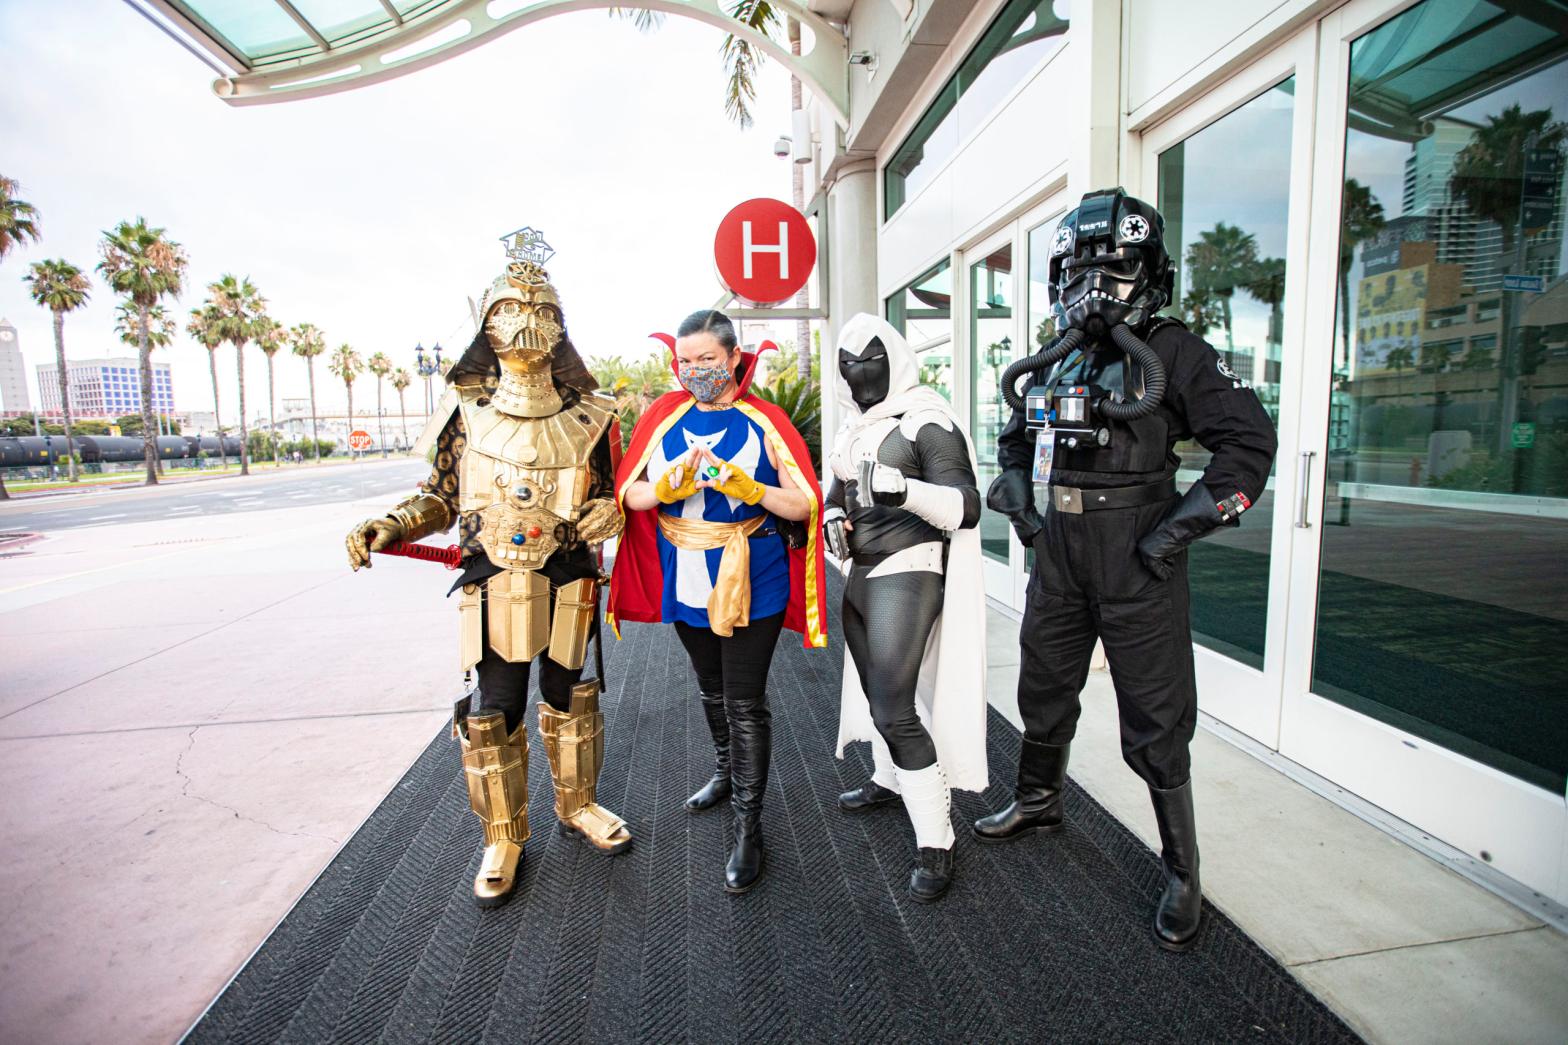 Cosplayers Christopher Canole as Dude Vader, Faeren Adams as Dr. Strange, Derek Shackelton as Moon Knight, and Todd Felton as a TIE pilot pose in front of Hall H at San Diego Convention Centre on July 22, 2020 in San Diego, California. (Photo: Daniel Knighton/Getty Images, iStock by Getty Images)